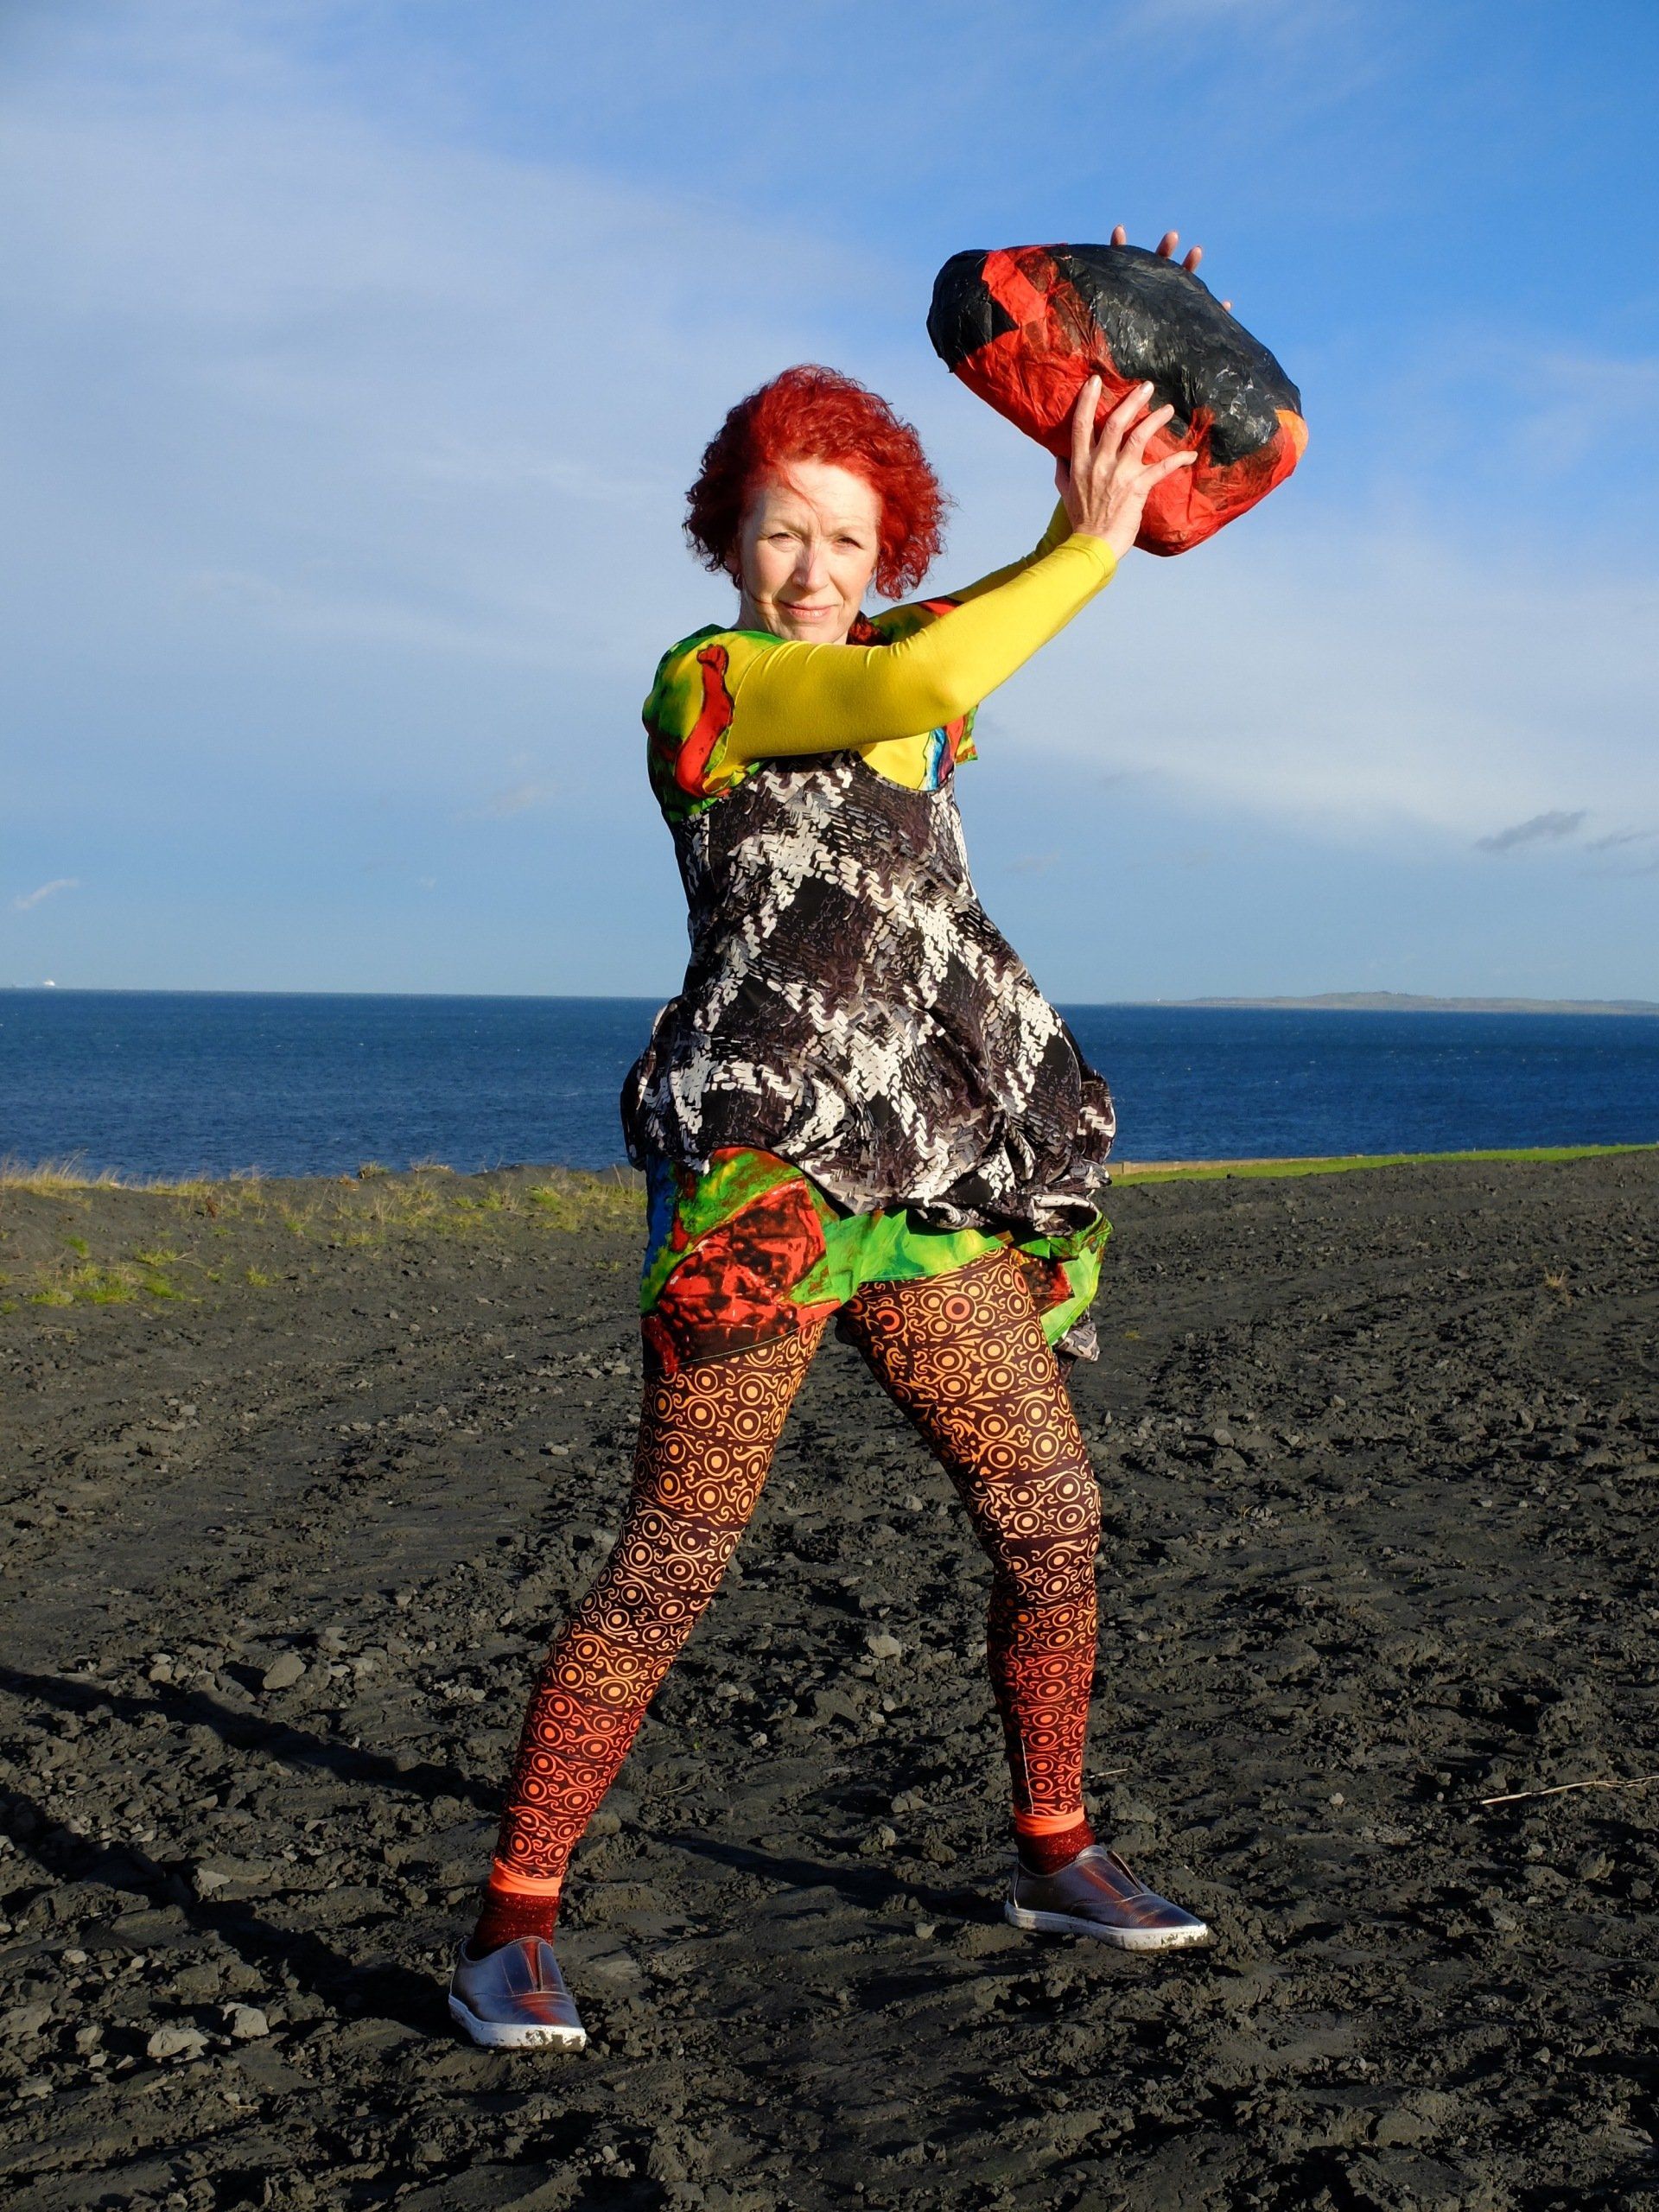 a woman in a colorful dress is holding a red rock over her head